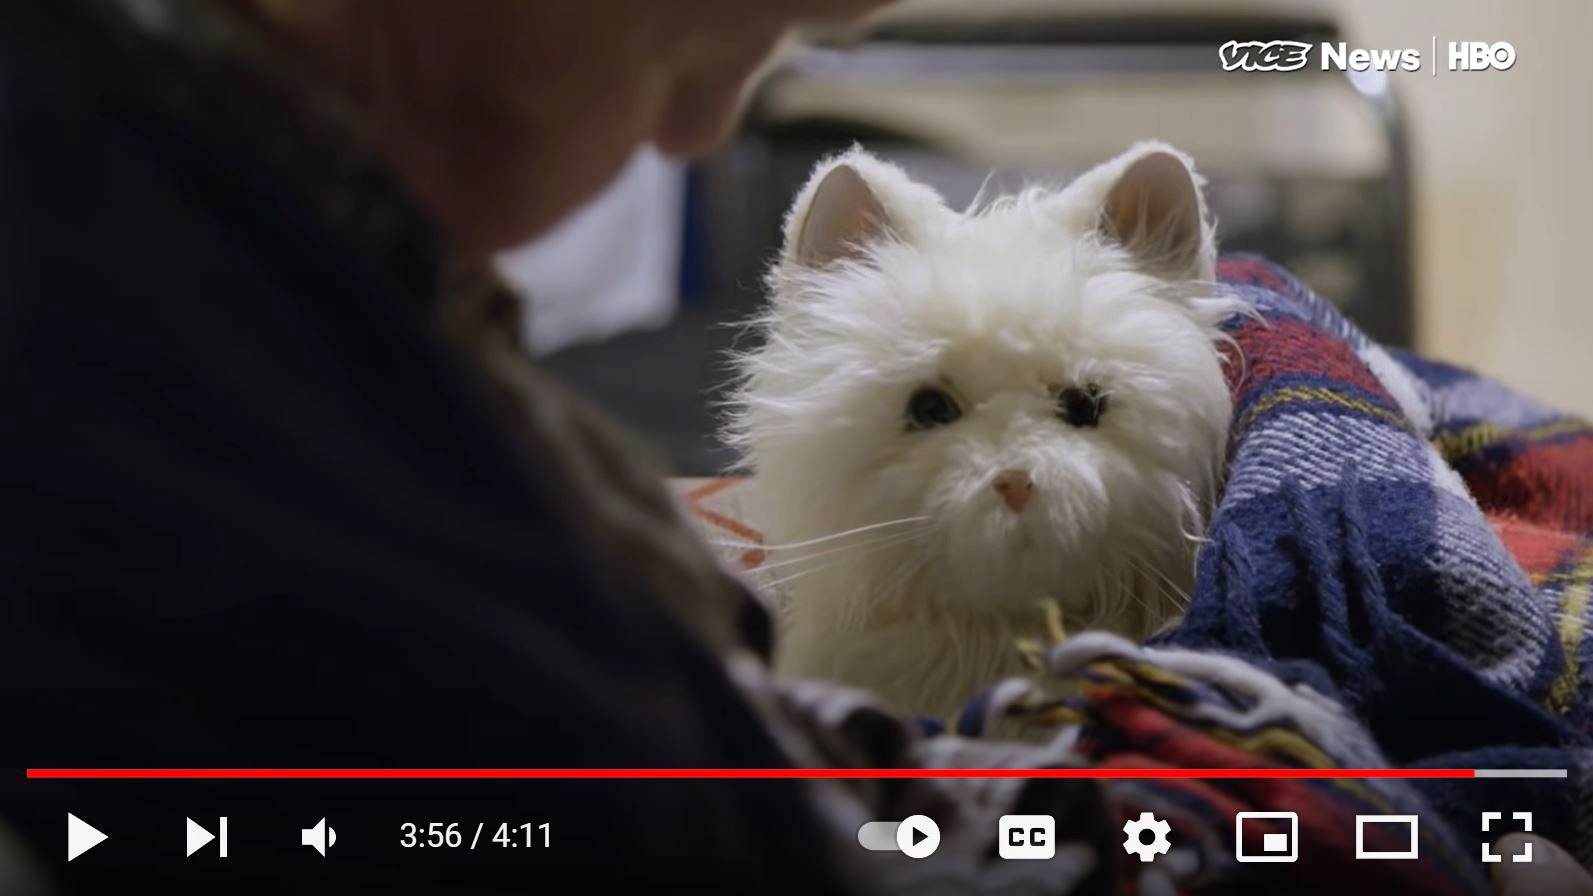 screenshot from video showing robotic pets at a nursing home in Massachusetts - link to video at bottom of article